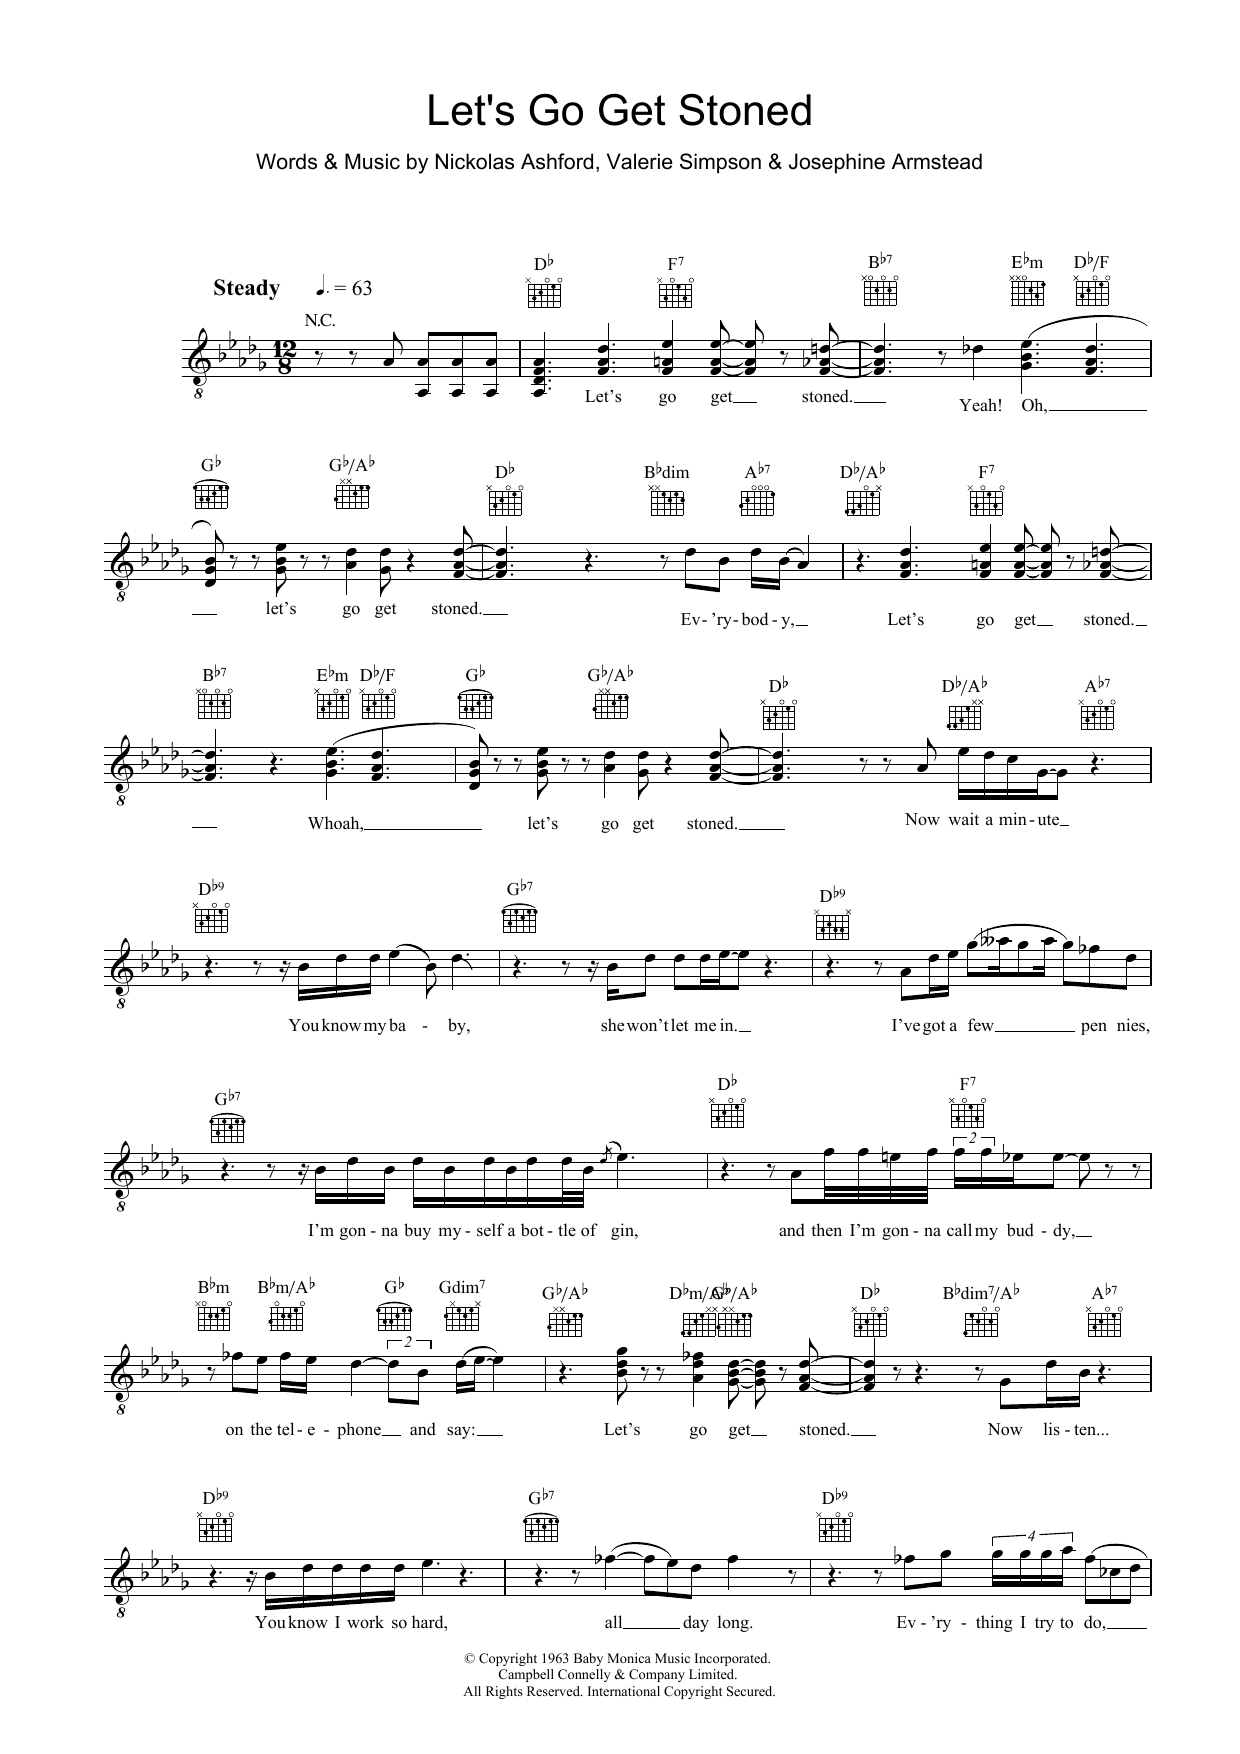 Download Ray Charles Let's Go Get Stoned Sheet Music